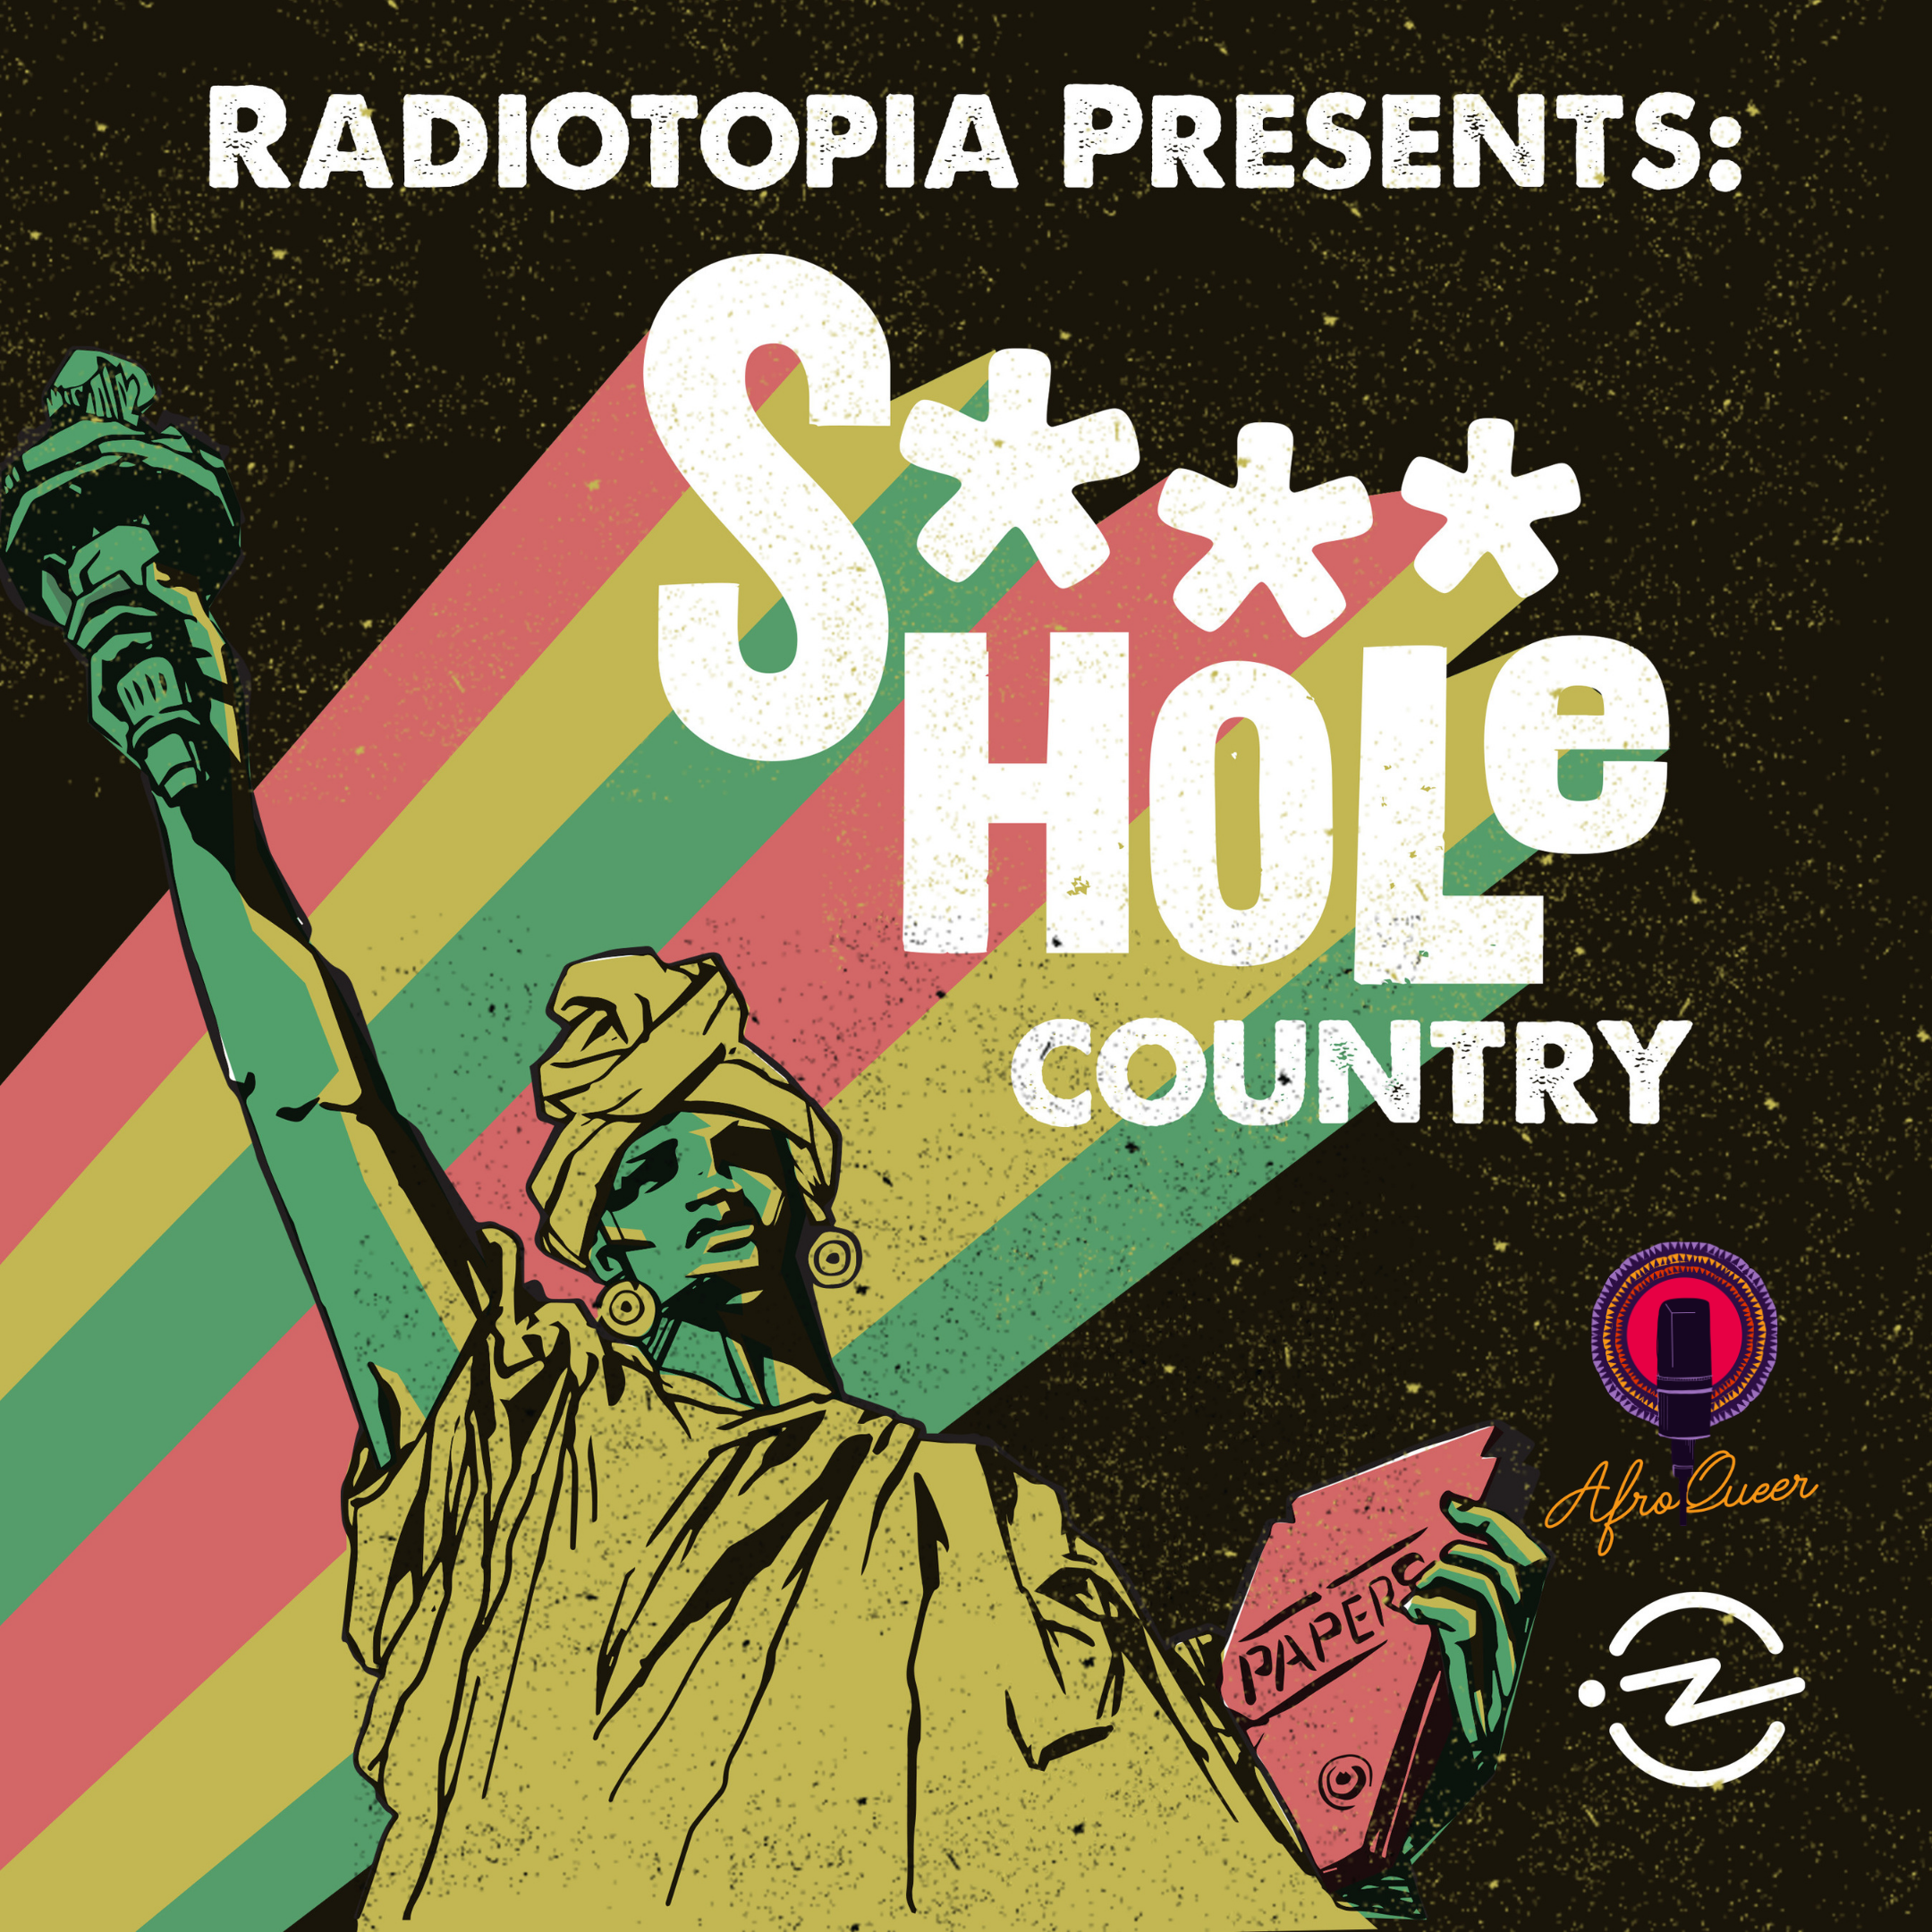 AfroQueer Presents: S***hole Country